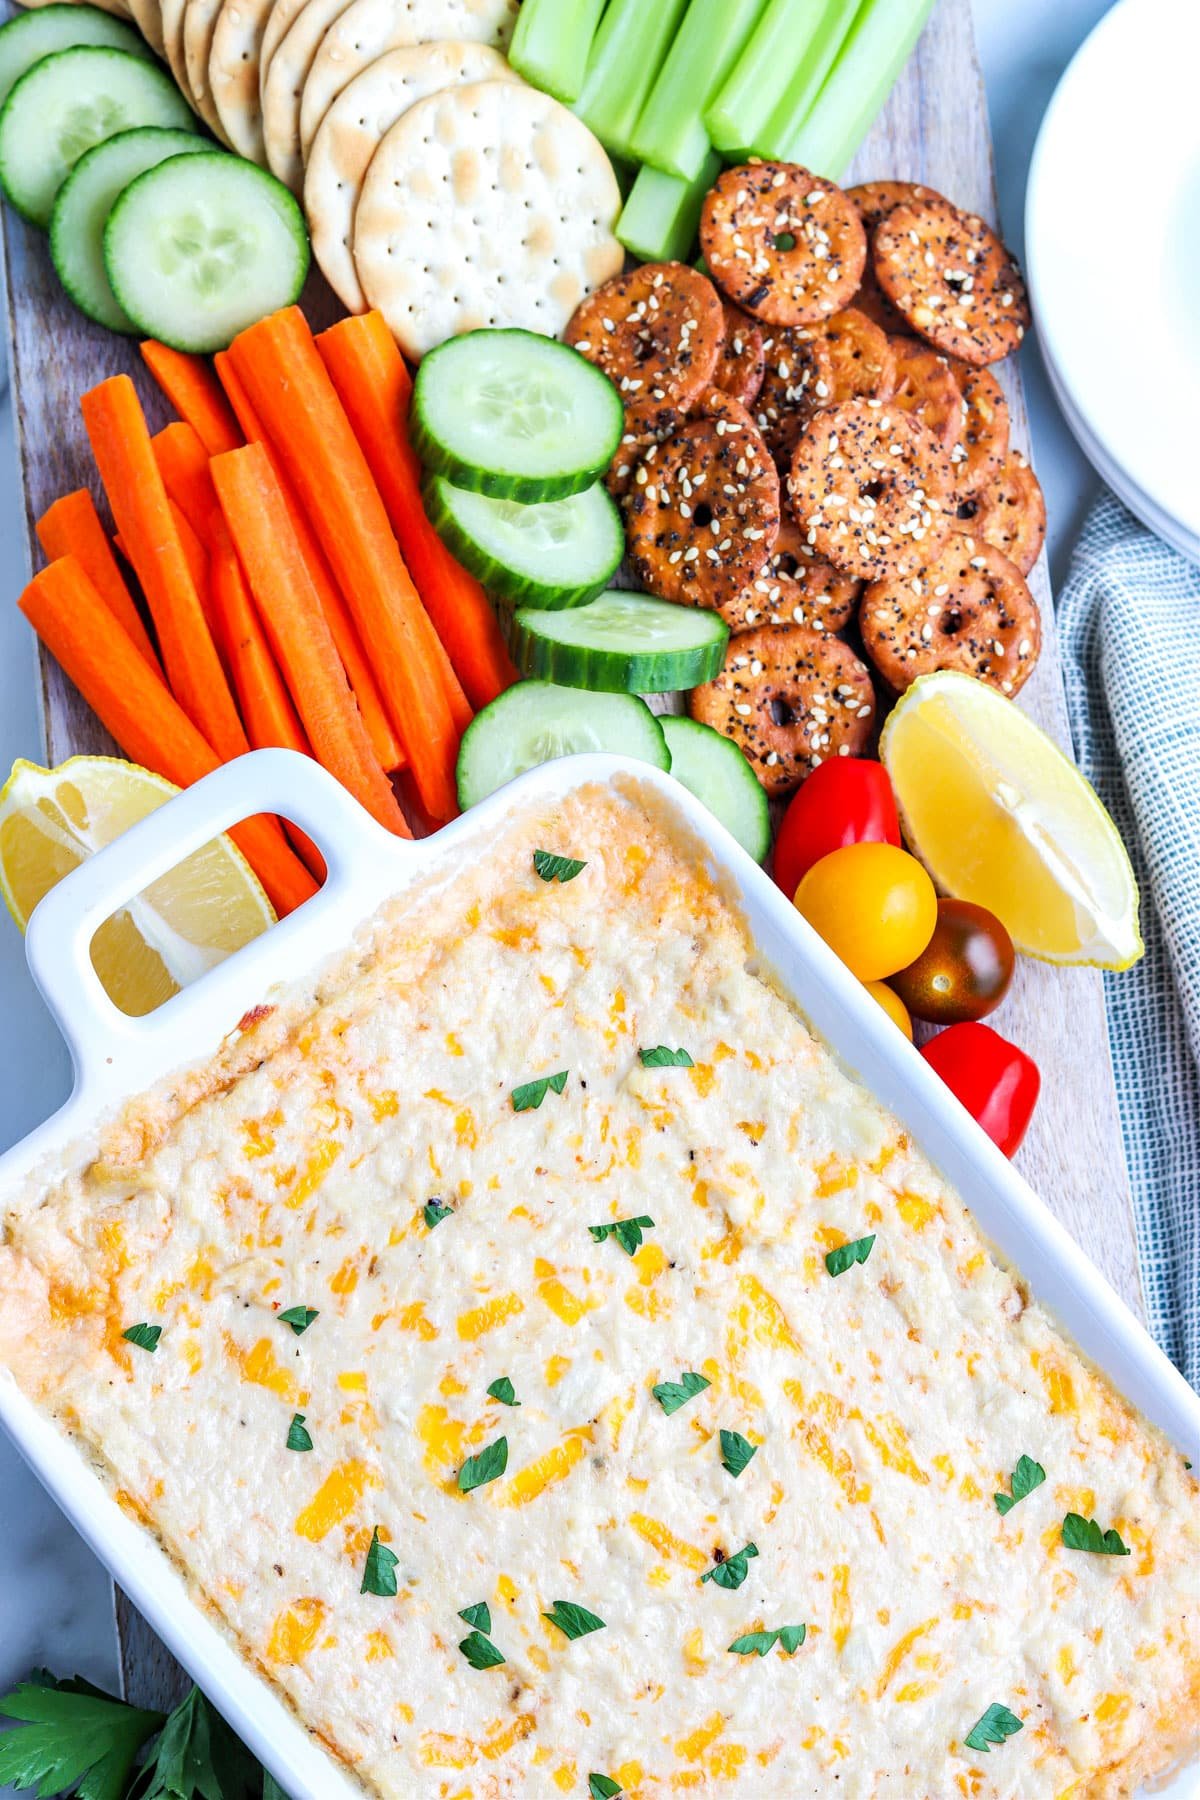 An overhead picture of the finished Hot Crab Dip with carrots, cucumber, pretzels, and crackers surrounding it.